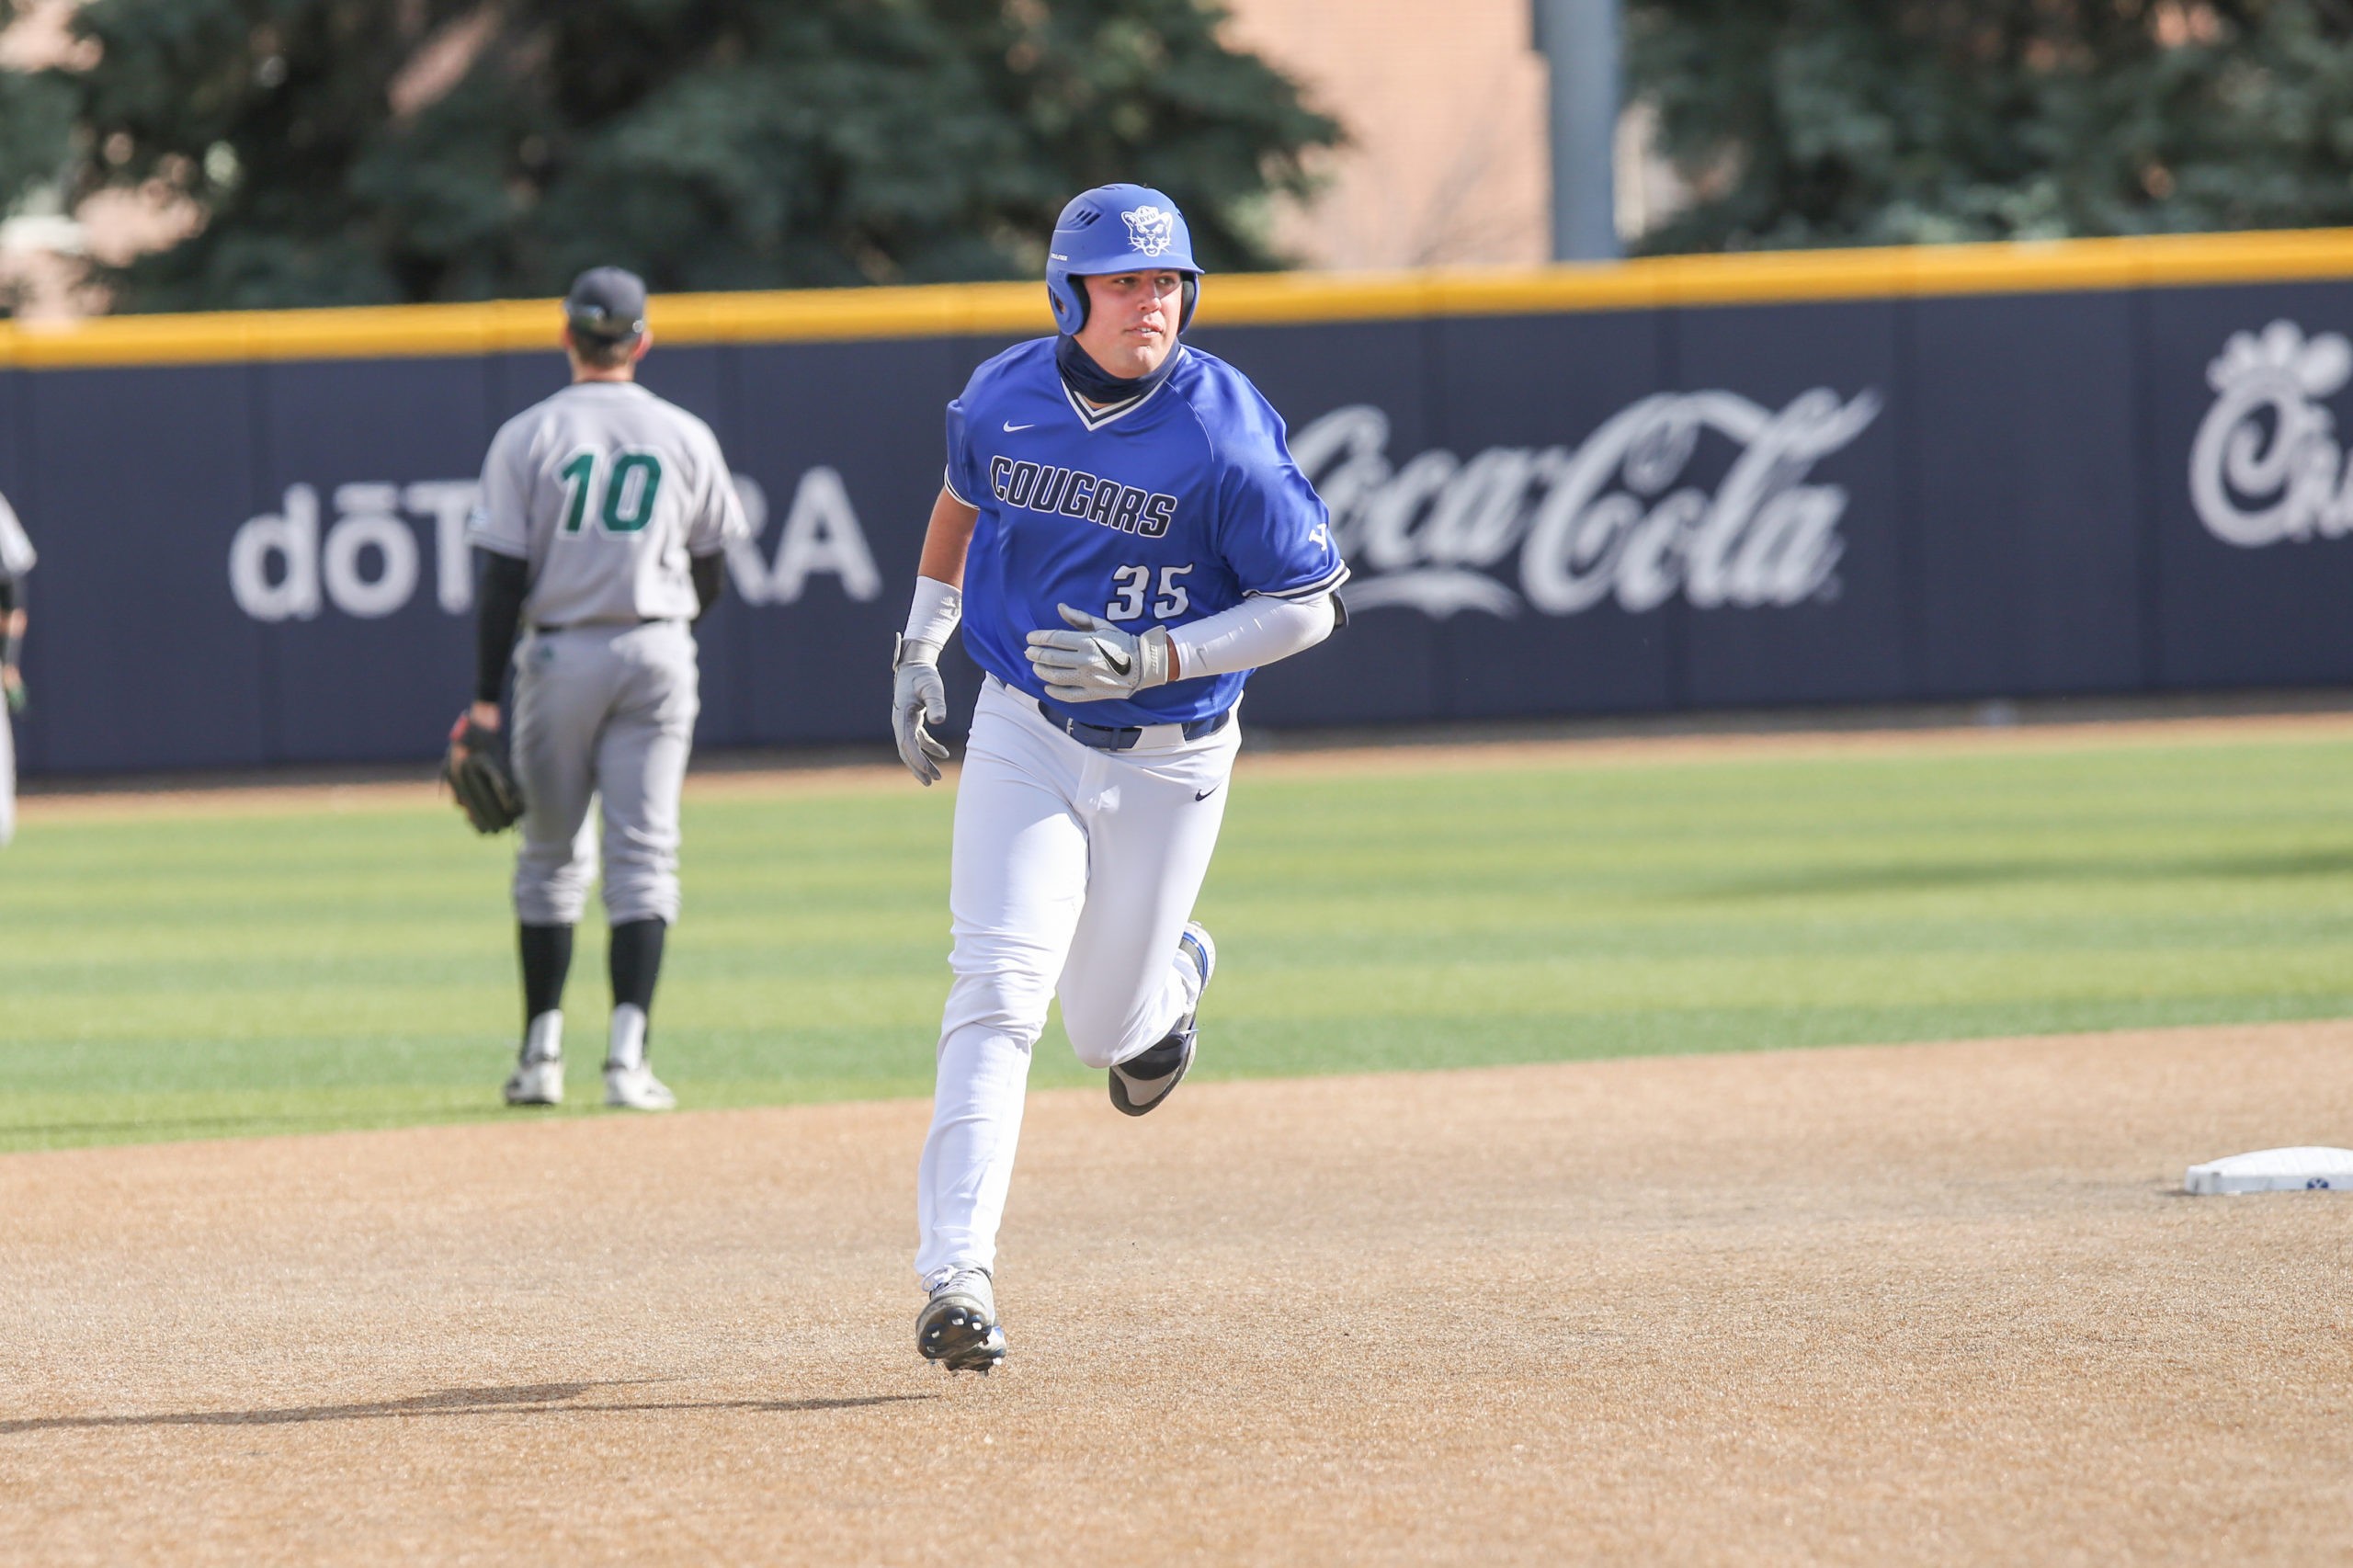 BYU baseball extends win streak to four games after 11-7 victory over UVU